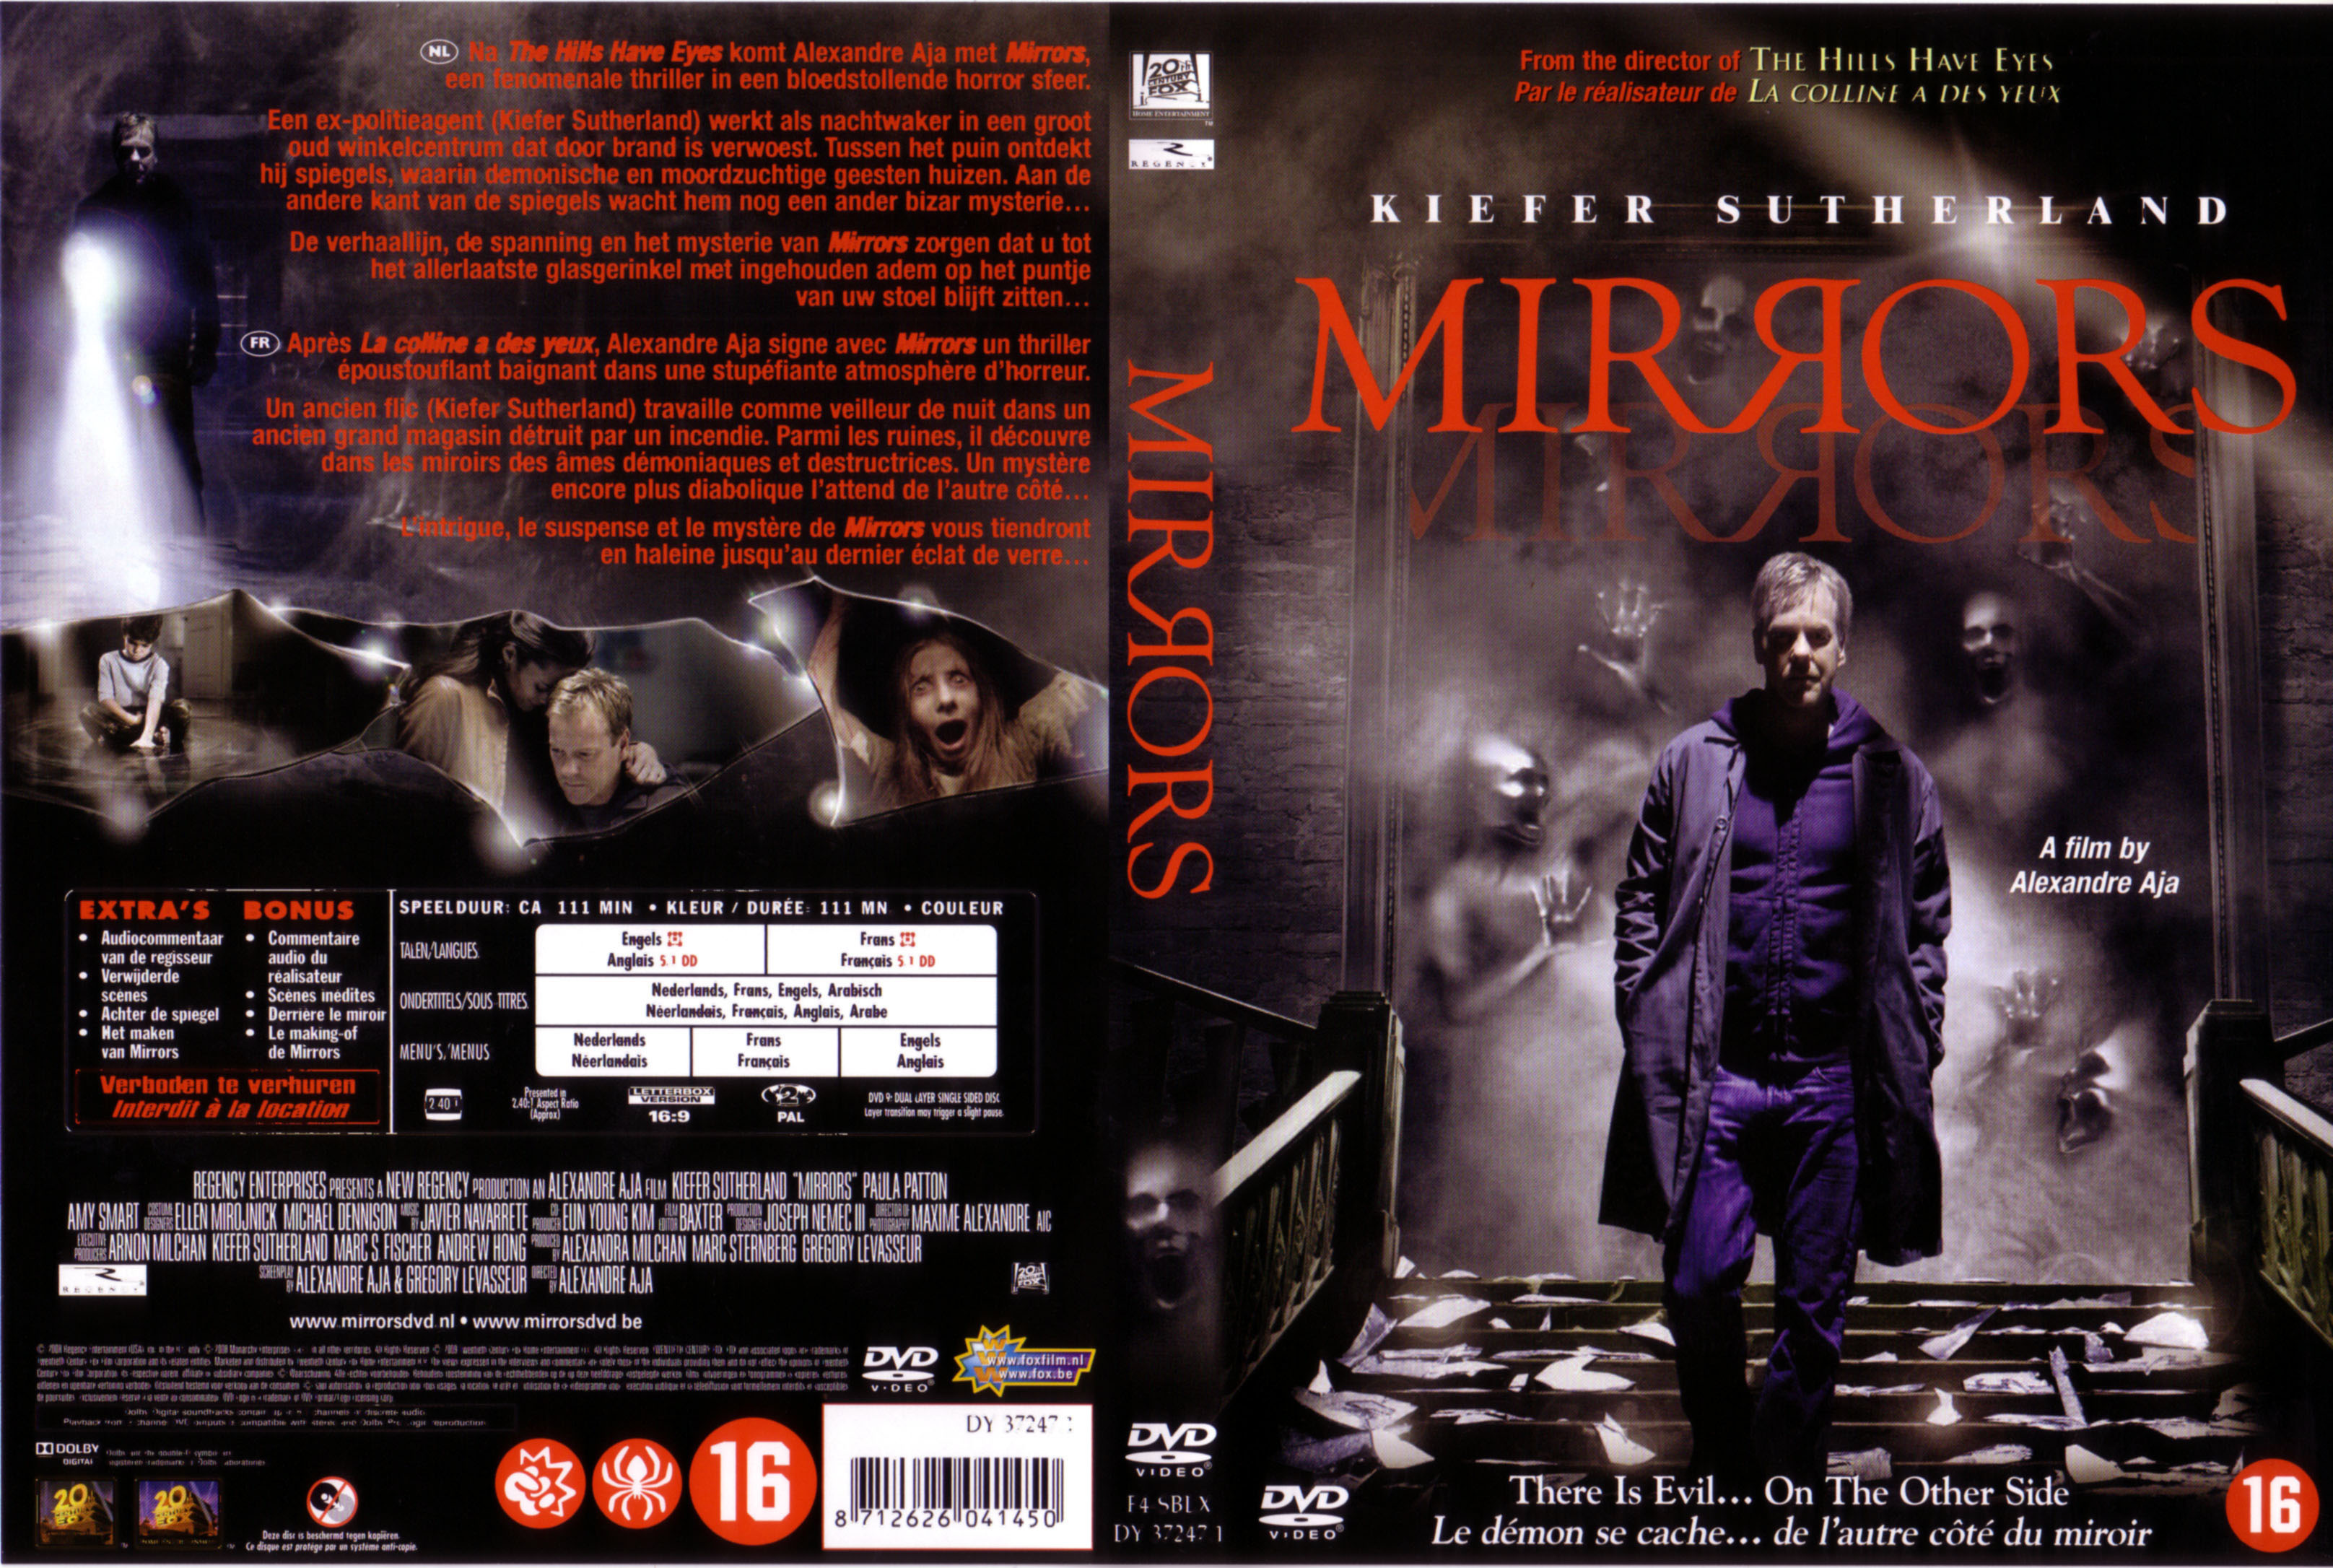 Jaquette DVD Mirrors v2